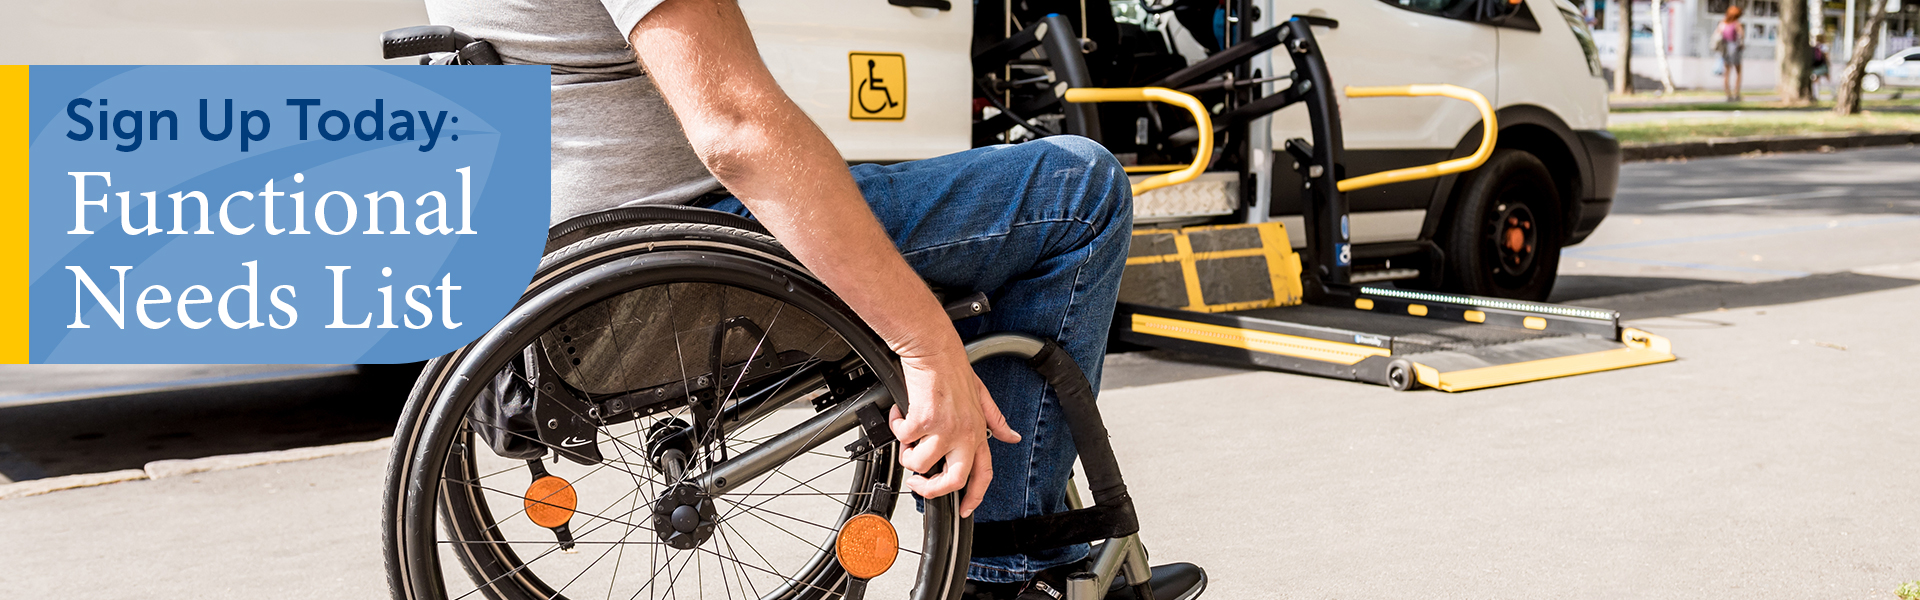 Sign Up for Functional Needs List - Man in Wheelchair approaching transport van